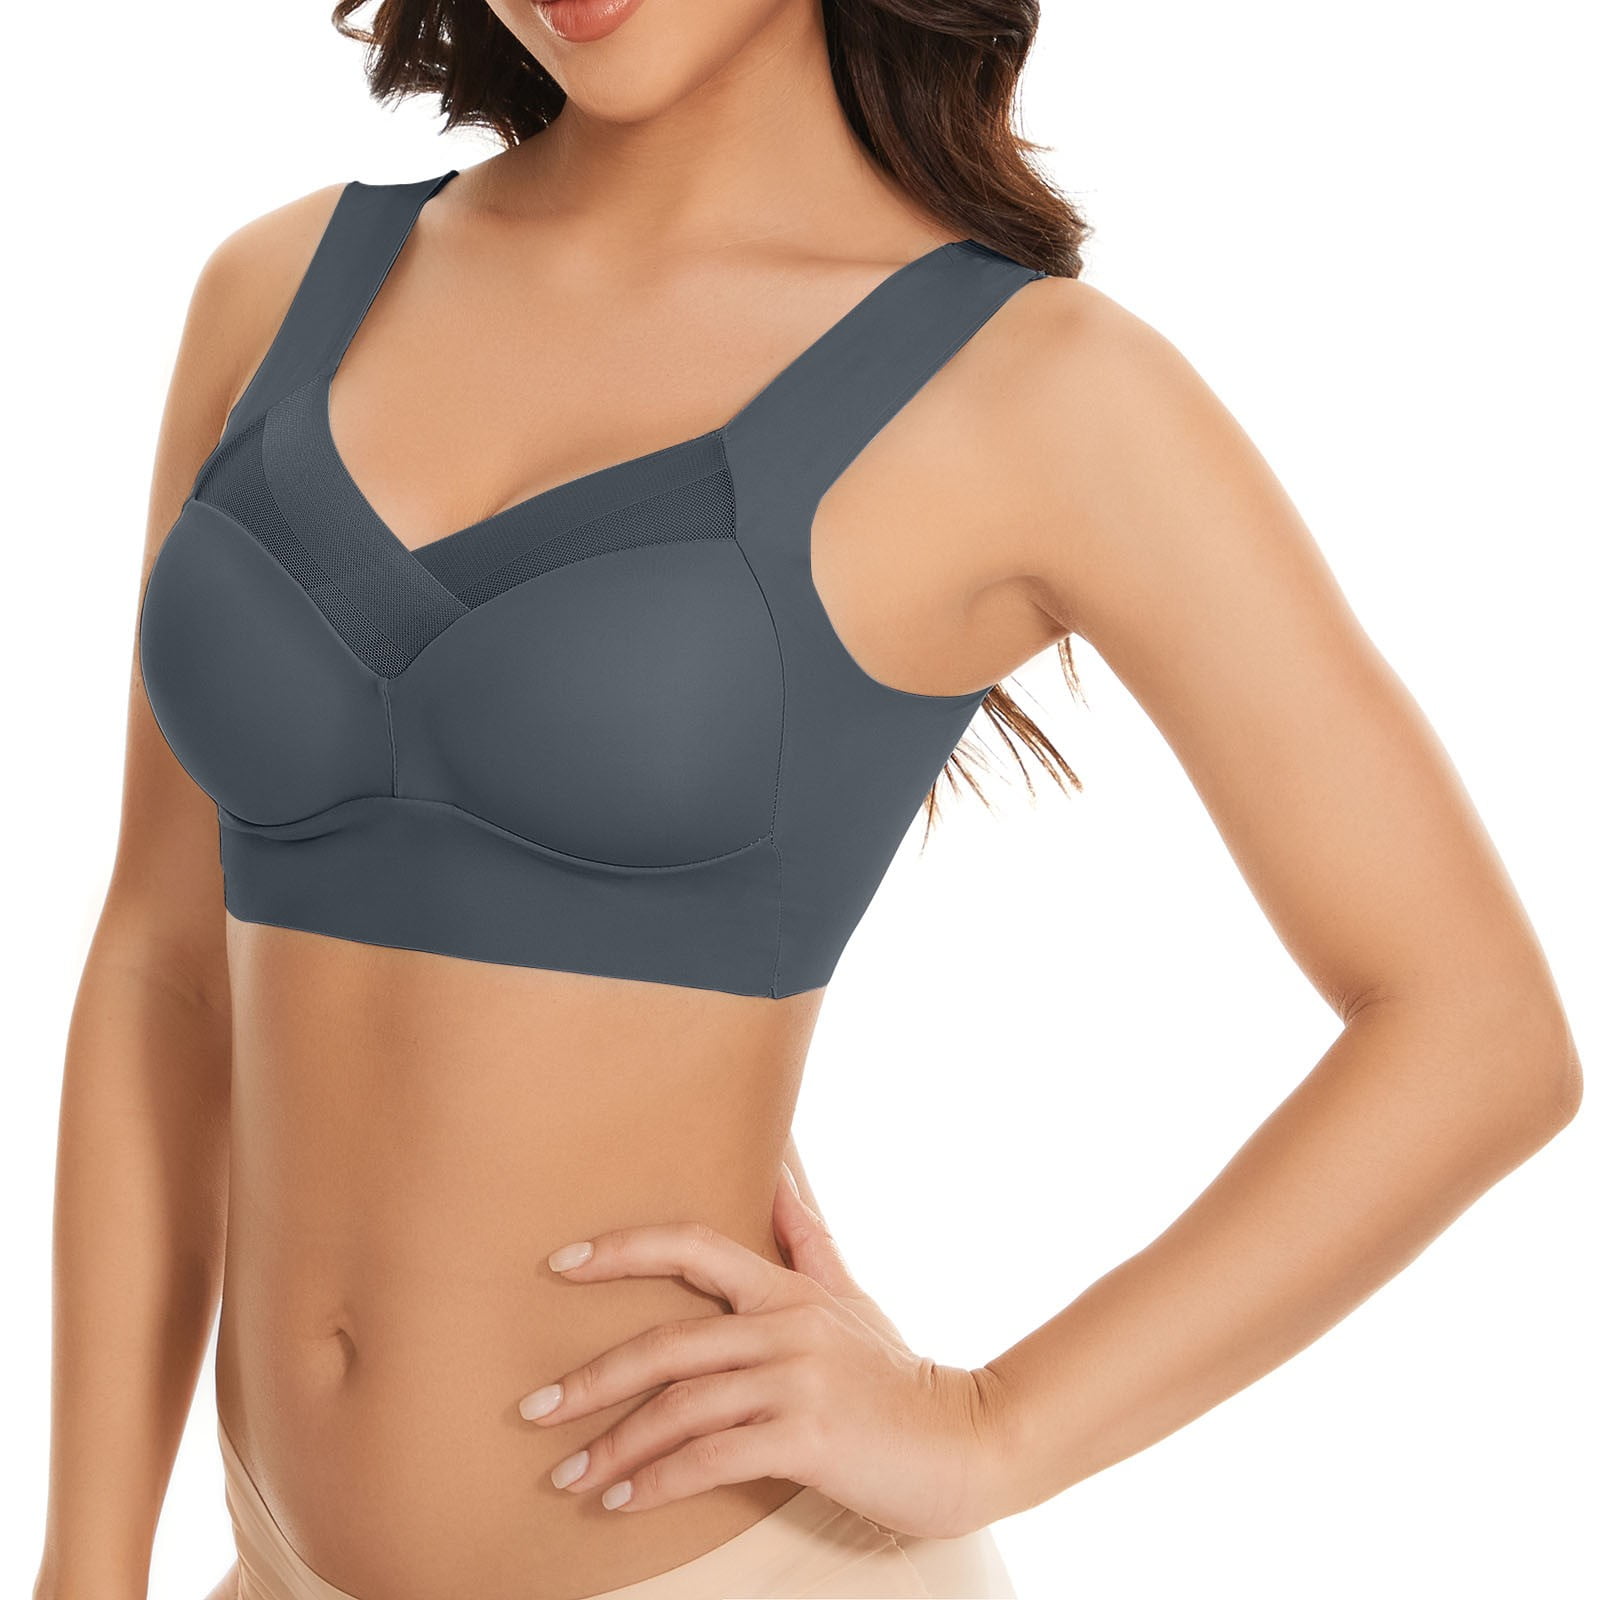 TQWQT Lady Bra Push Up Seamless Thin Wire Free No Constraint Women  Brassieres Daily Wear Clothes,Light Gray XXL 